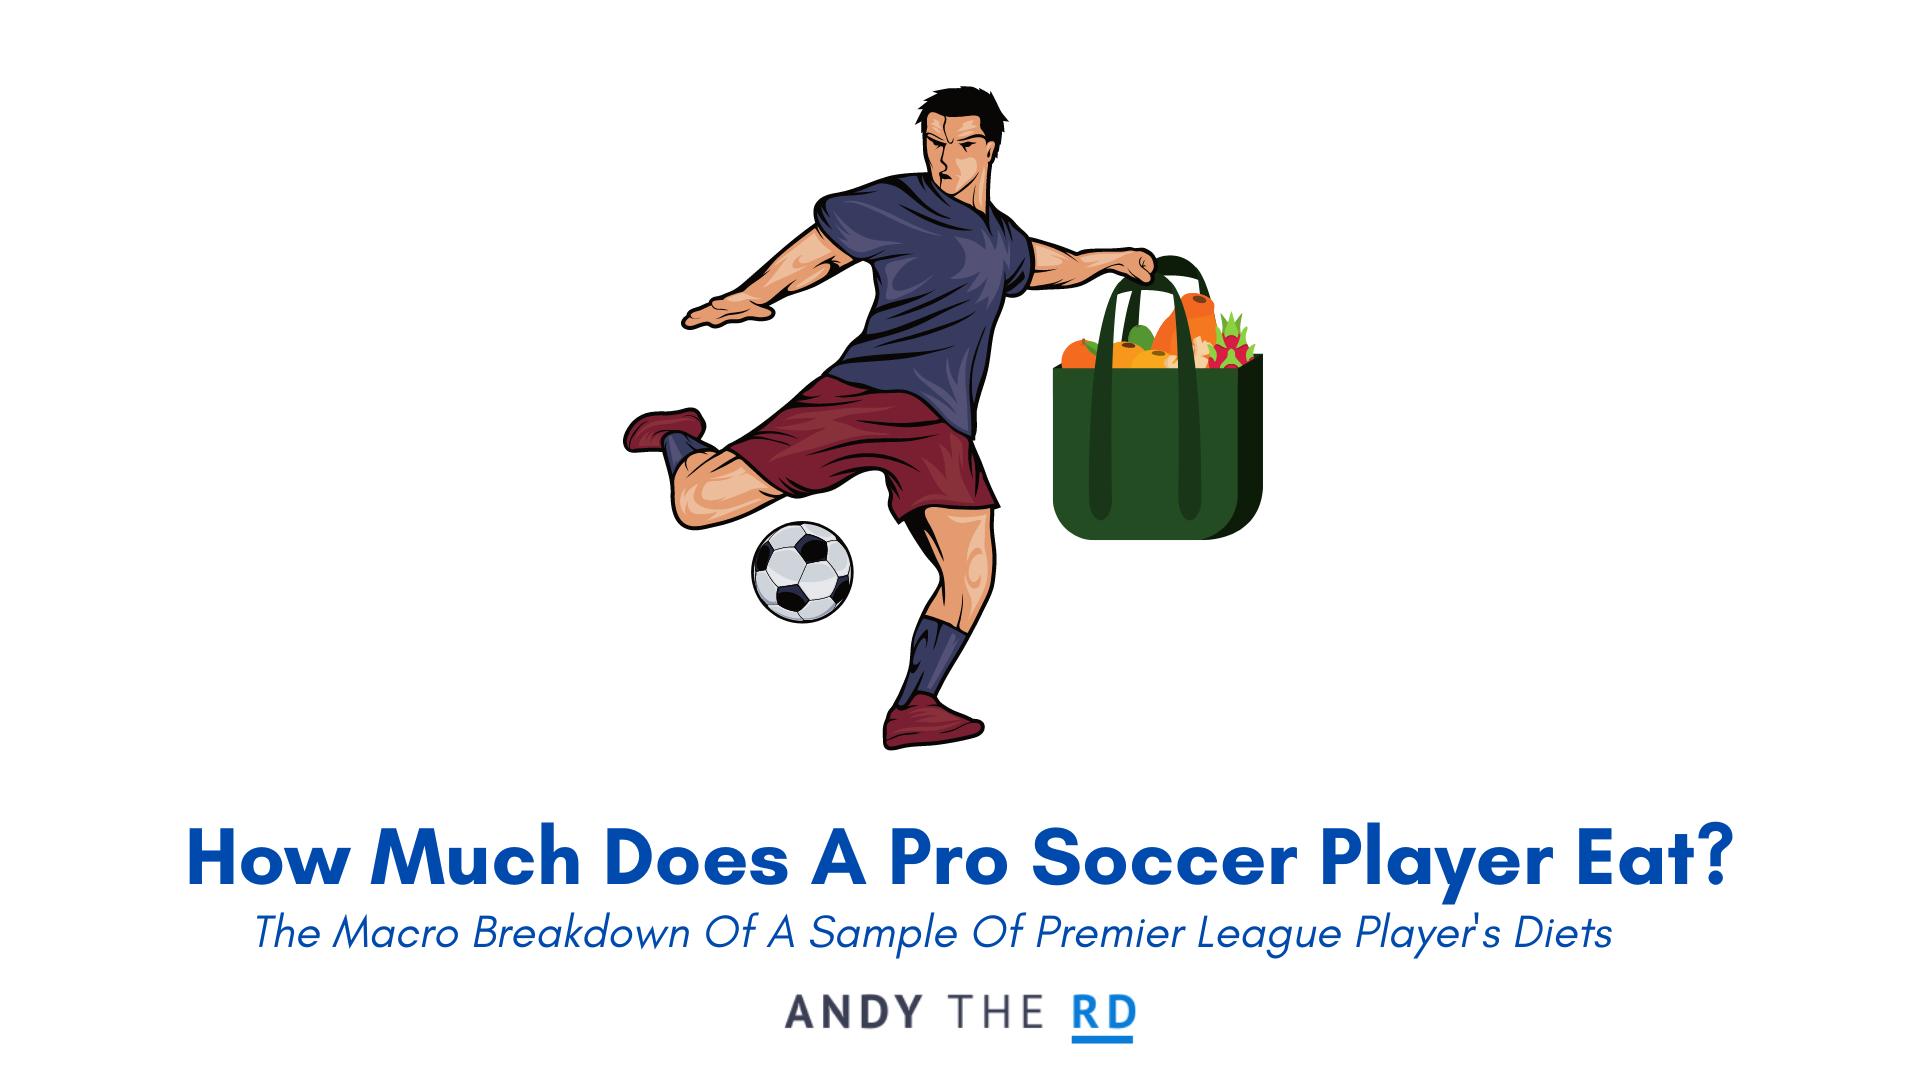 The Diet of Professional Soccer Players: What Do They Eat?